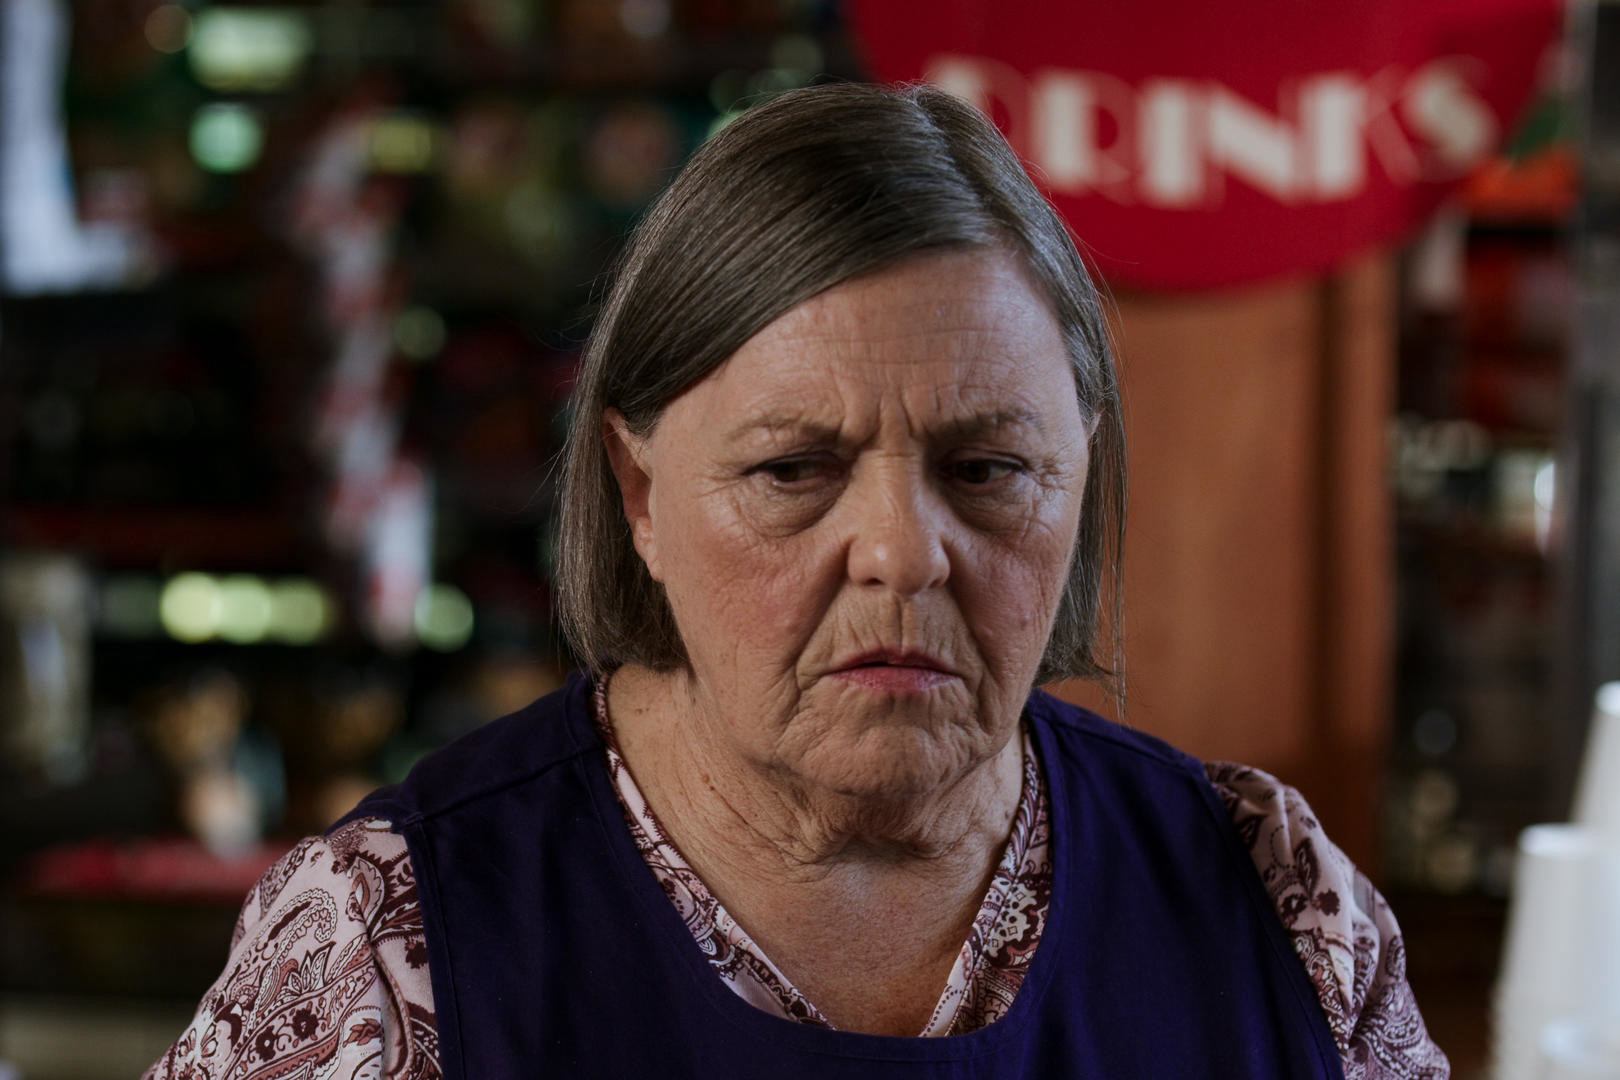 Nicola Cavendish scowls as Connie on 'Virgin River'